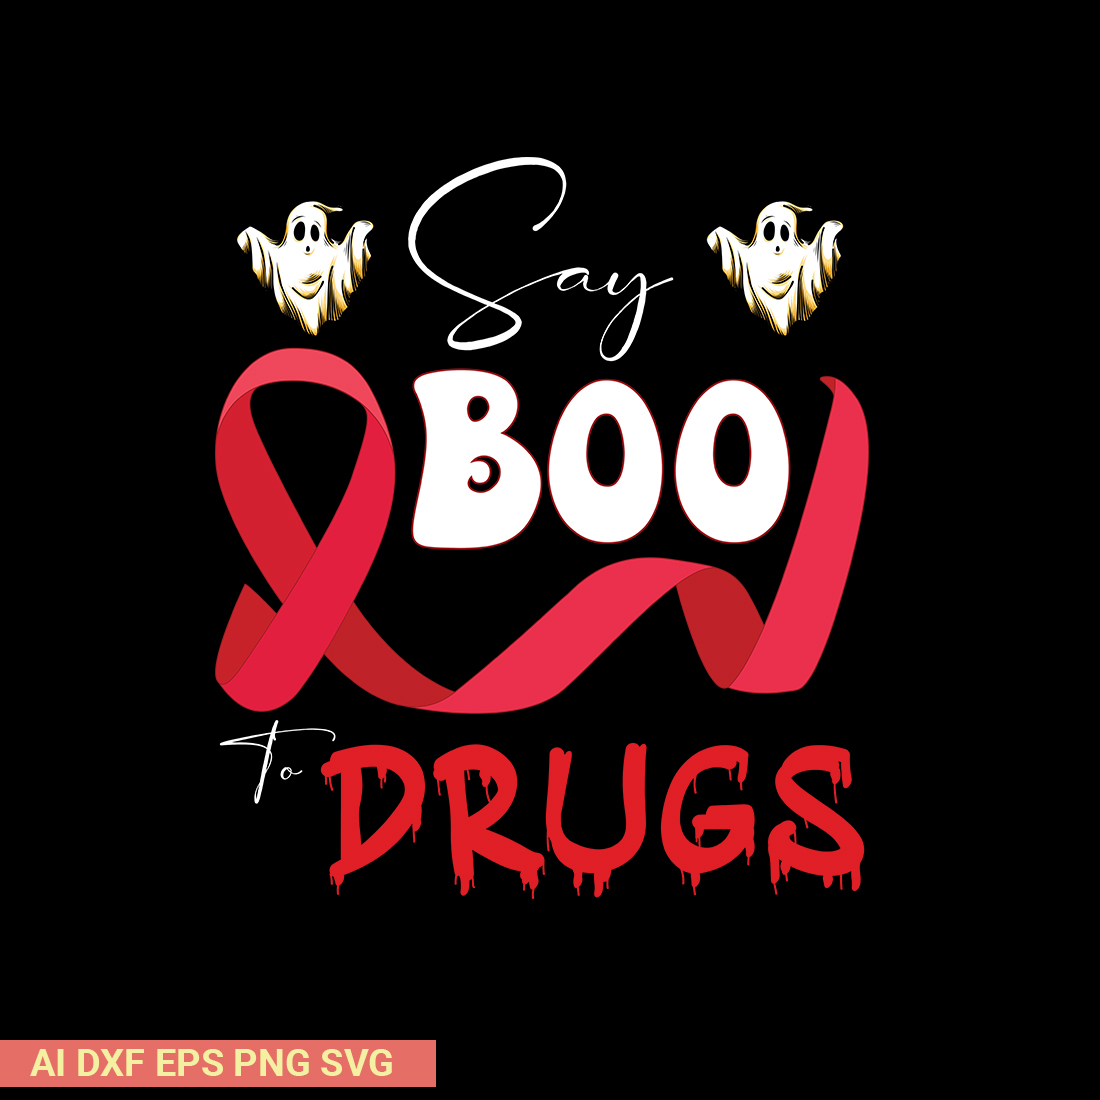 Say Boo to drugs svg cover image.